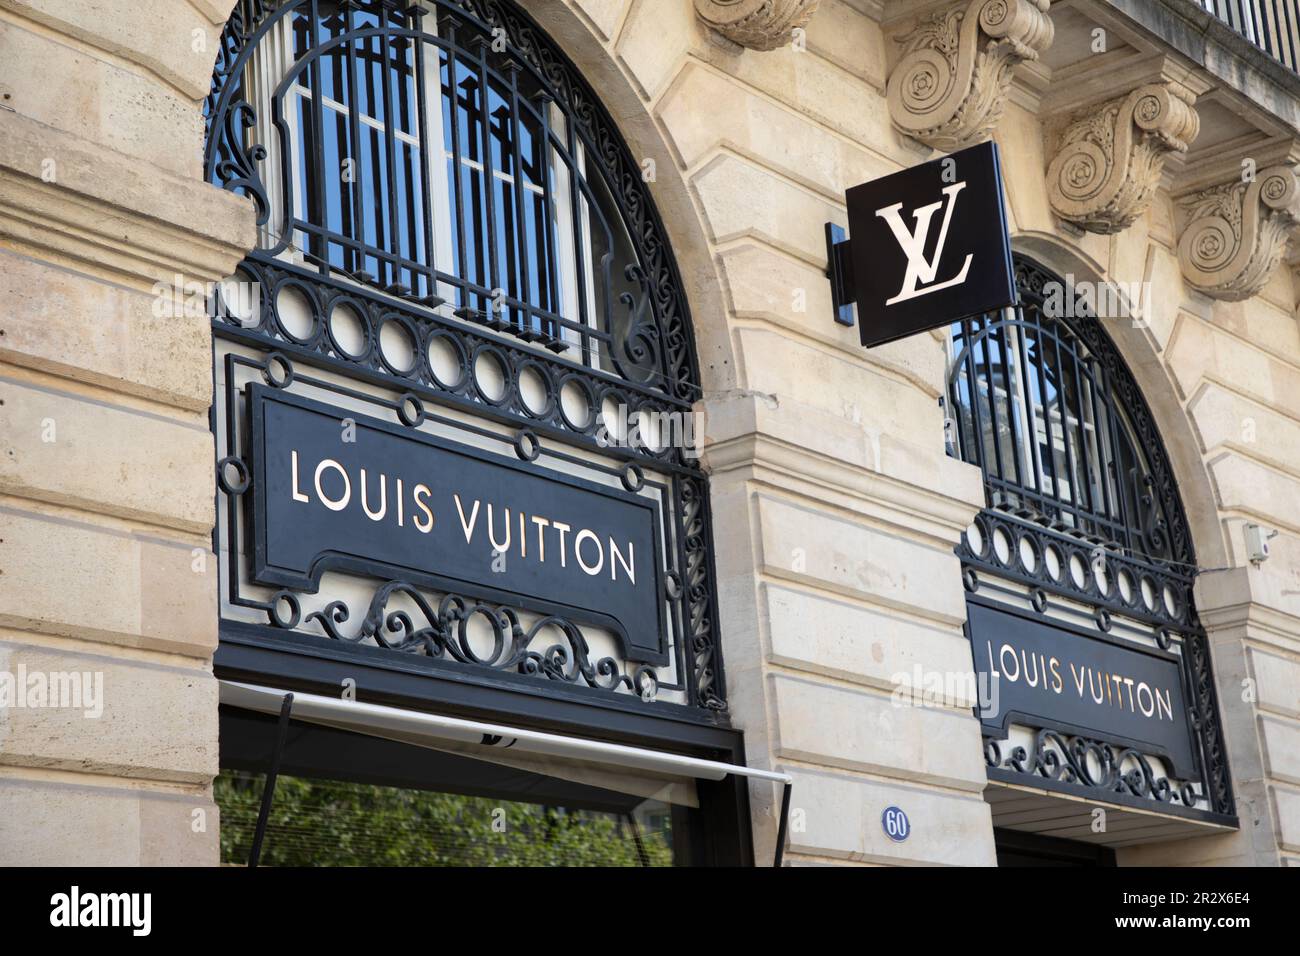 Bordeaux , Aquitaine  France - 05 19 2023 : Louis Vuitton logo brand store and sign facade text shop on entrance boutique Luxury handbags and luggages Stock Photo